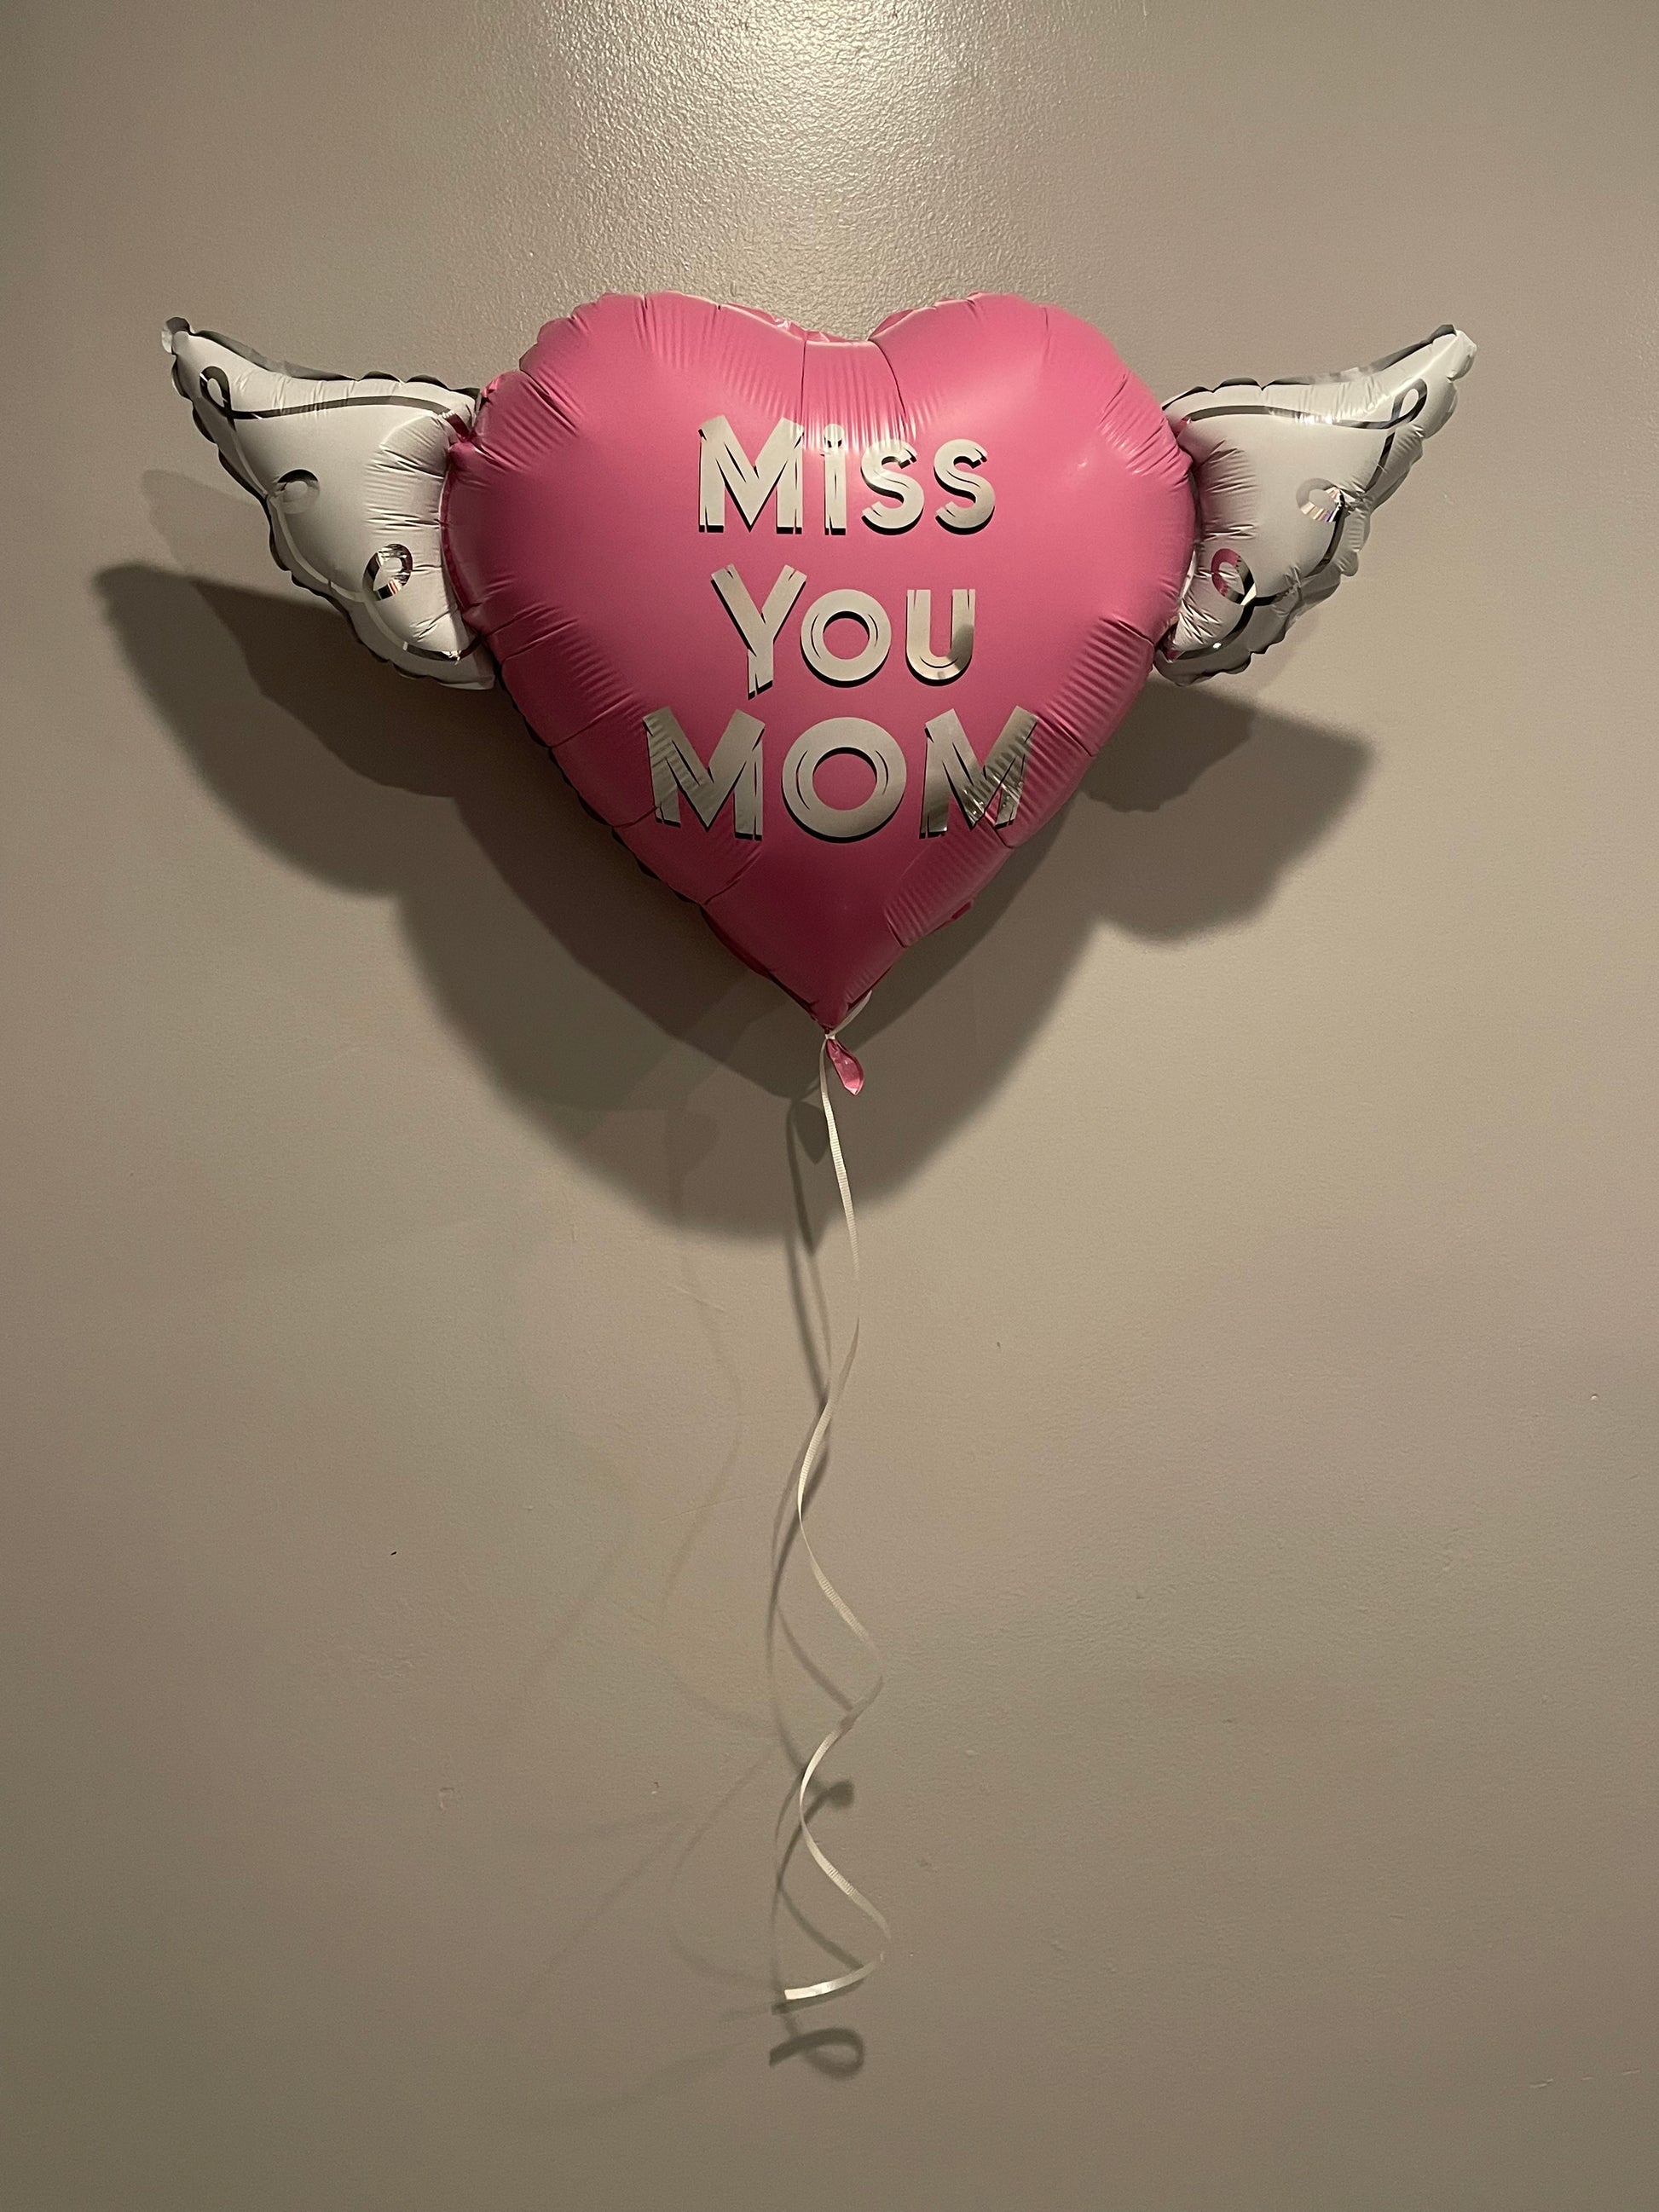 Miss You Mom Heavenly Balloons ™ Heart Shaped with angel wings (Pink)